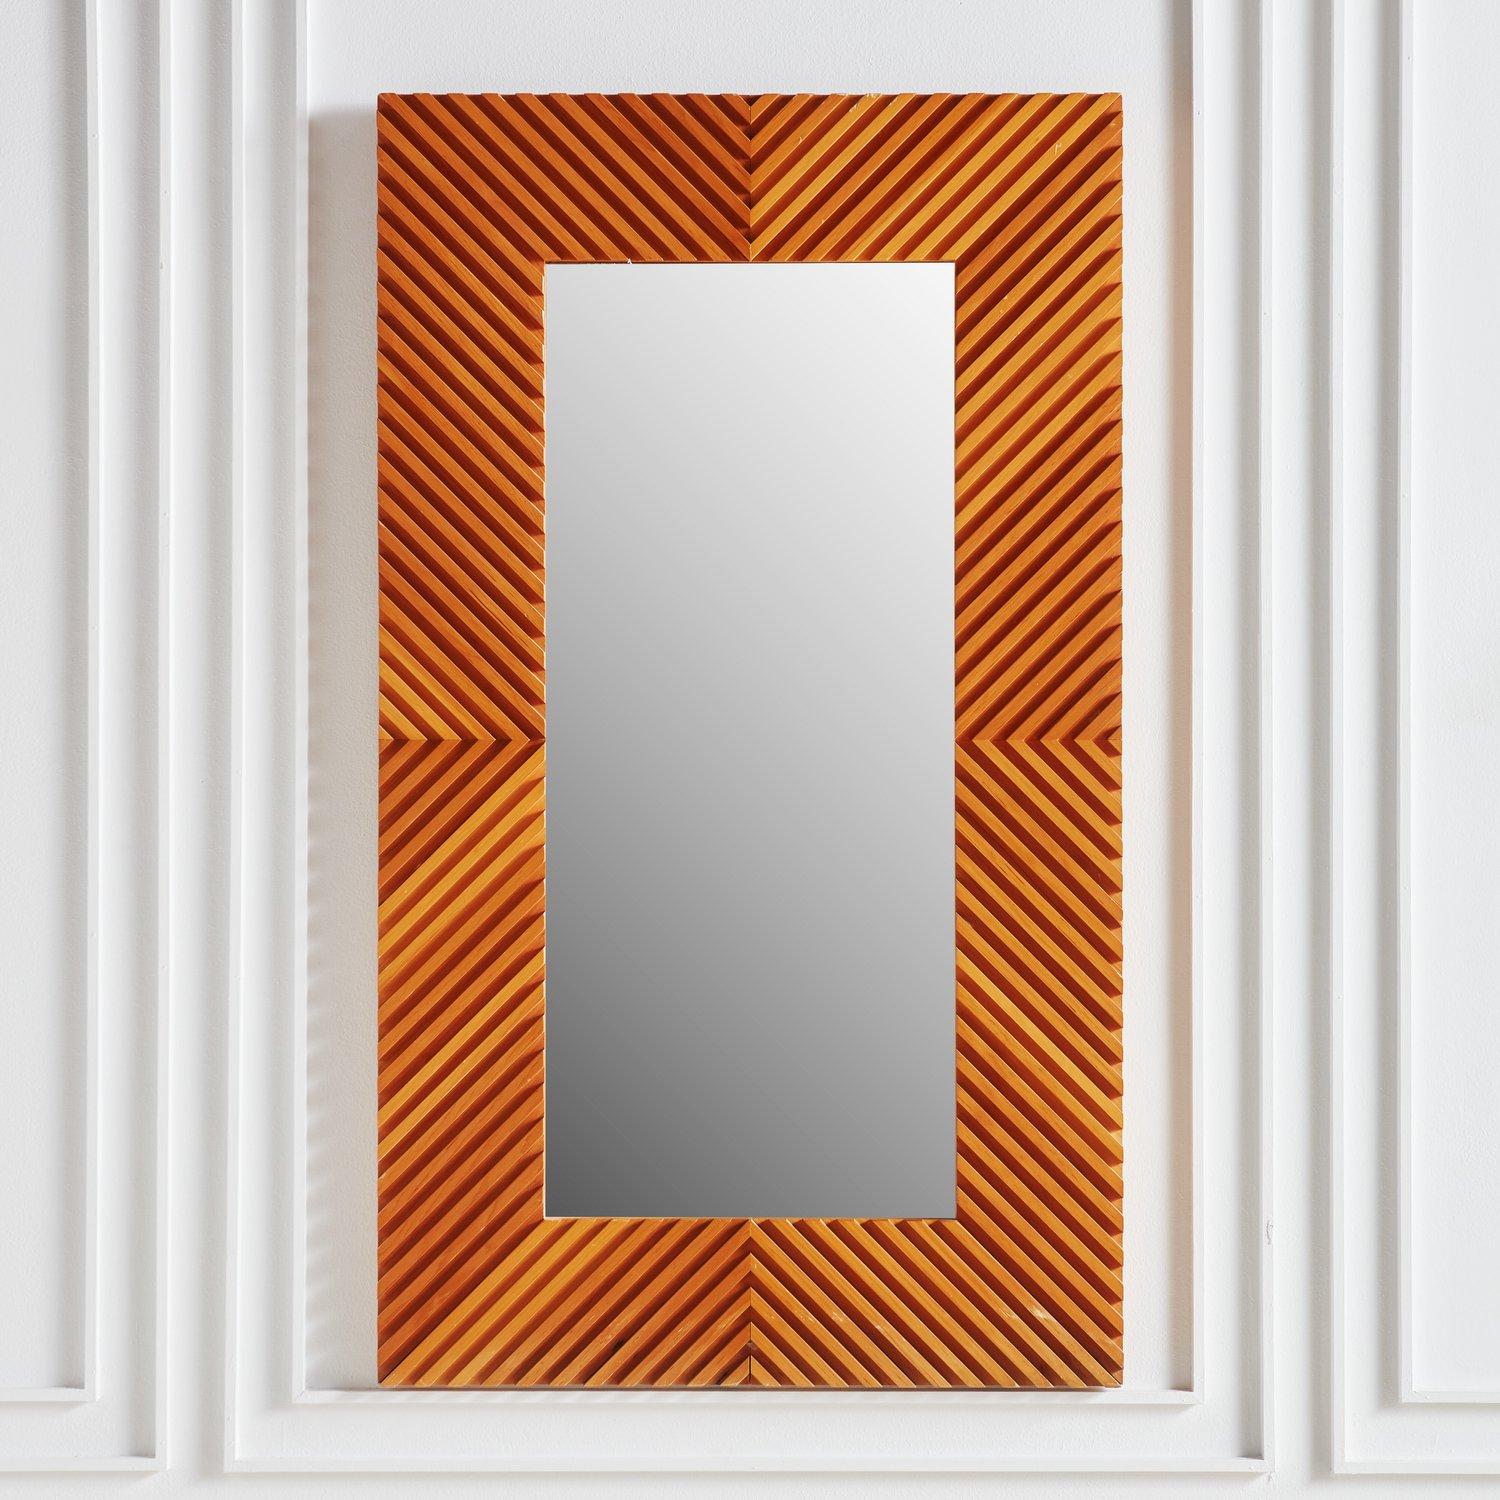 A gorgeous Mid century rectangular wall mirror by Greg Copeland, 1973. This mirror features a 7” wide wooden frame with a raised linear geometric pattern, reflective of Copeland’s signature op art style. The natural variances in the wood give this